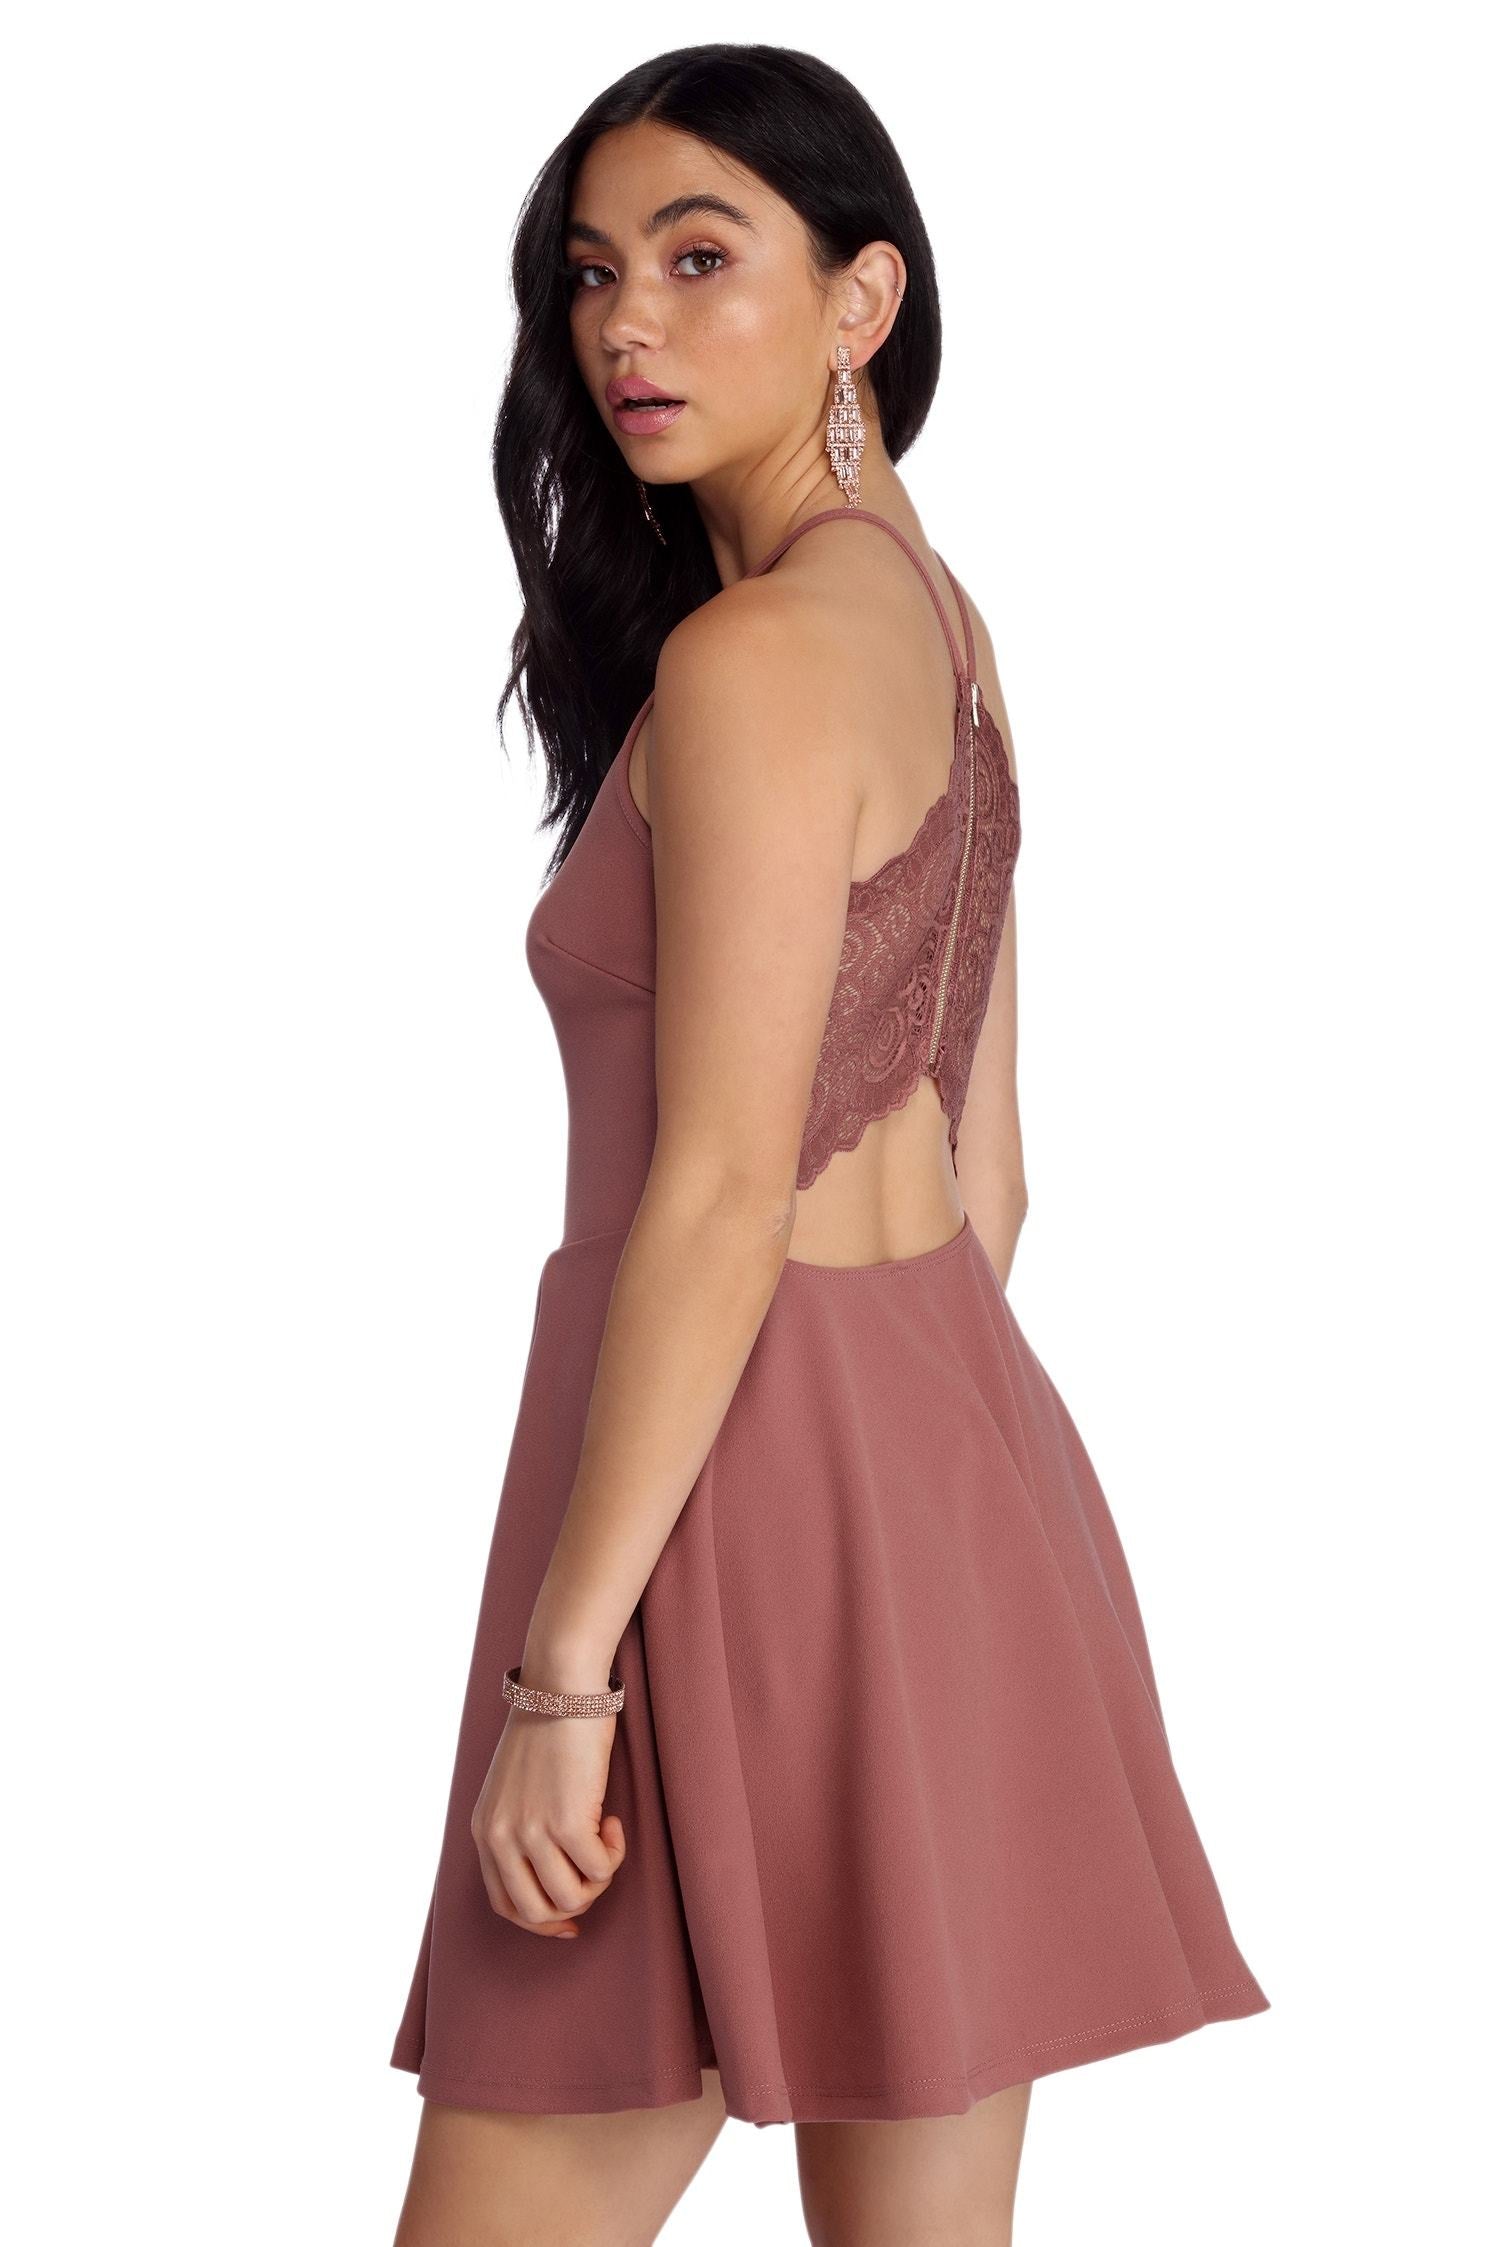 Memorable Moments Skater Dress - Lady Occasions